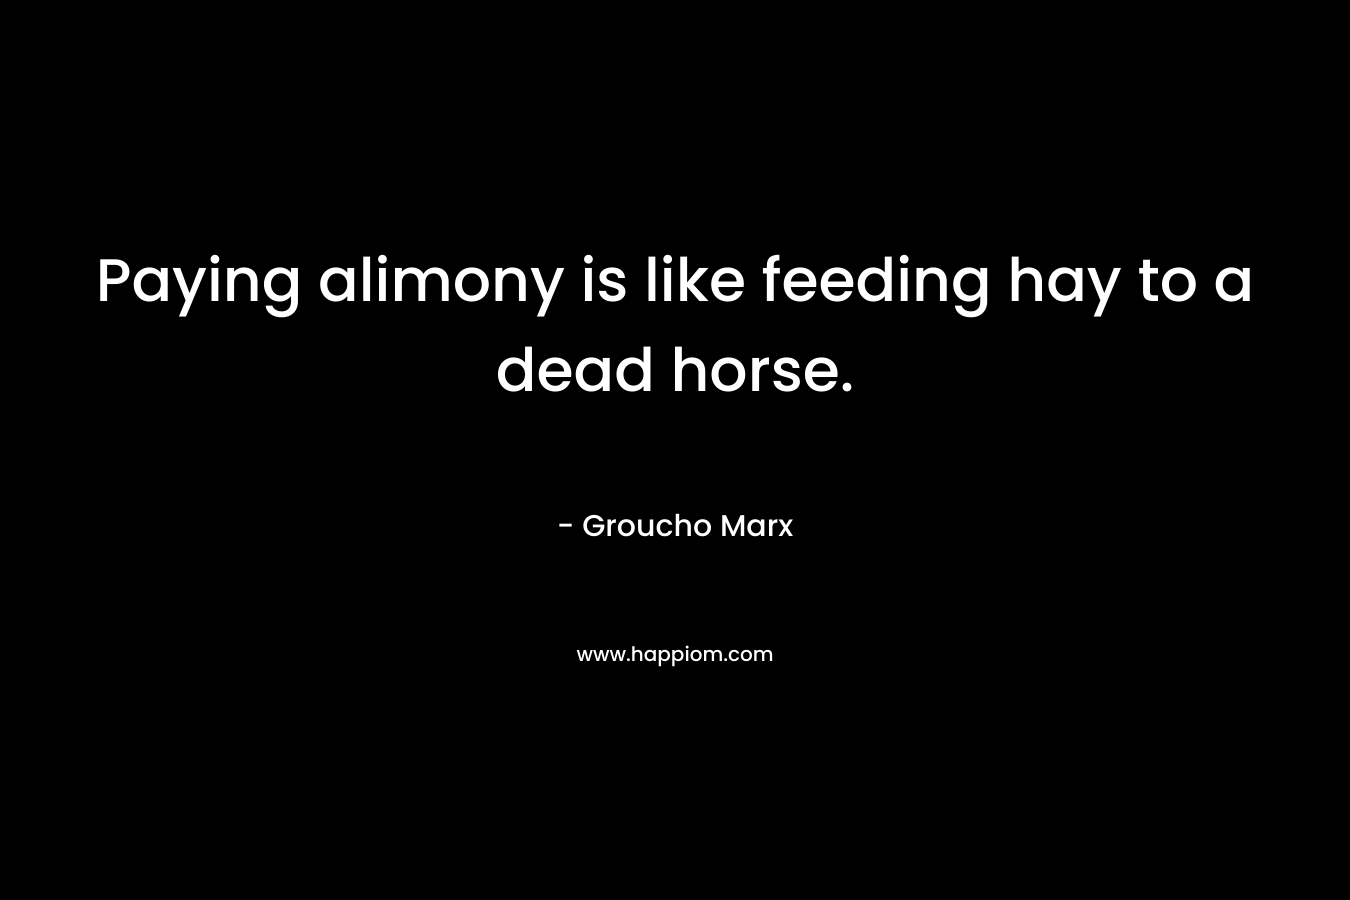 Paying alimony is like feeding hay to a dead horse.